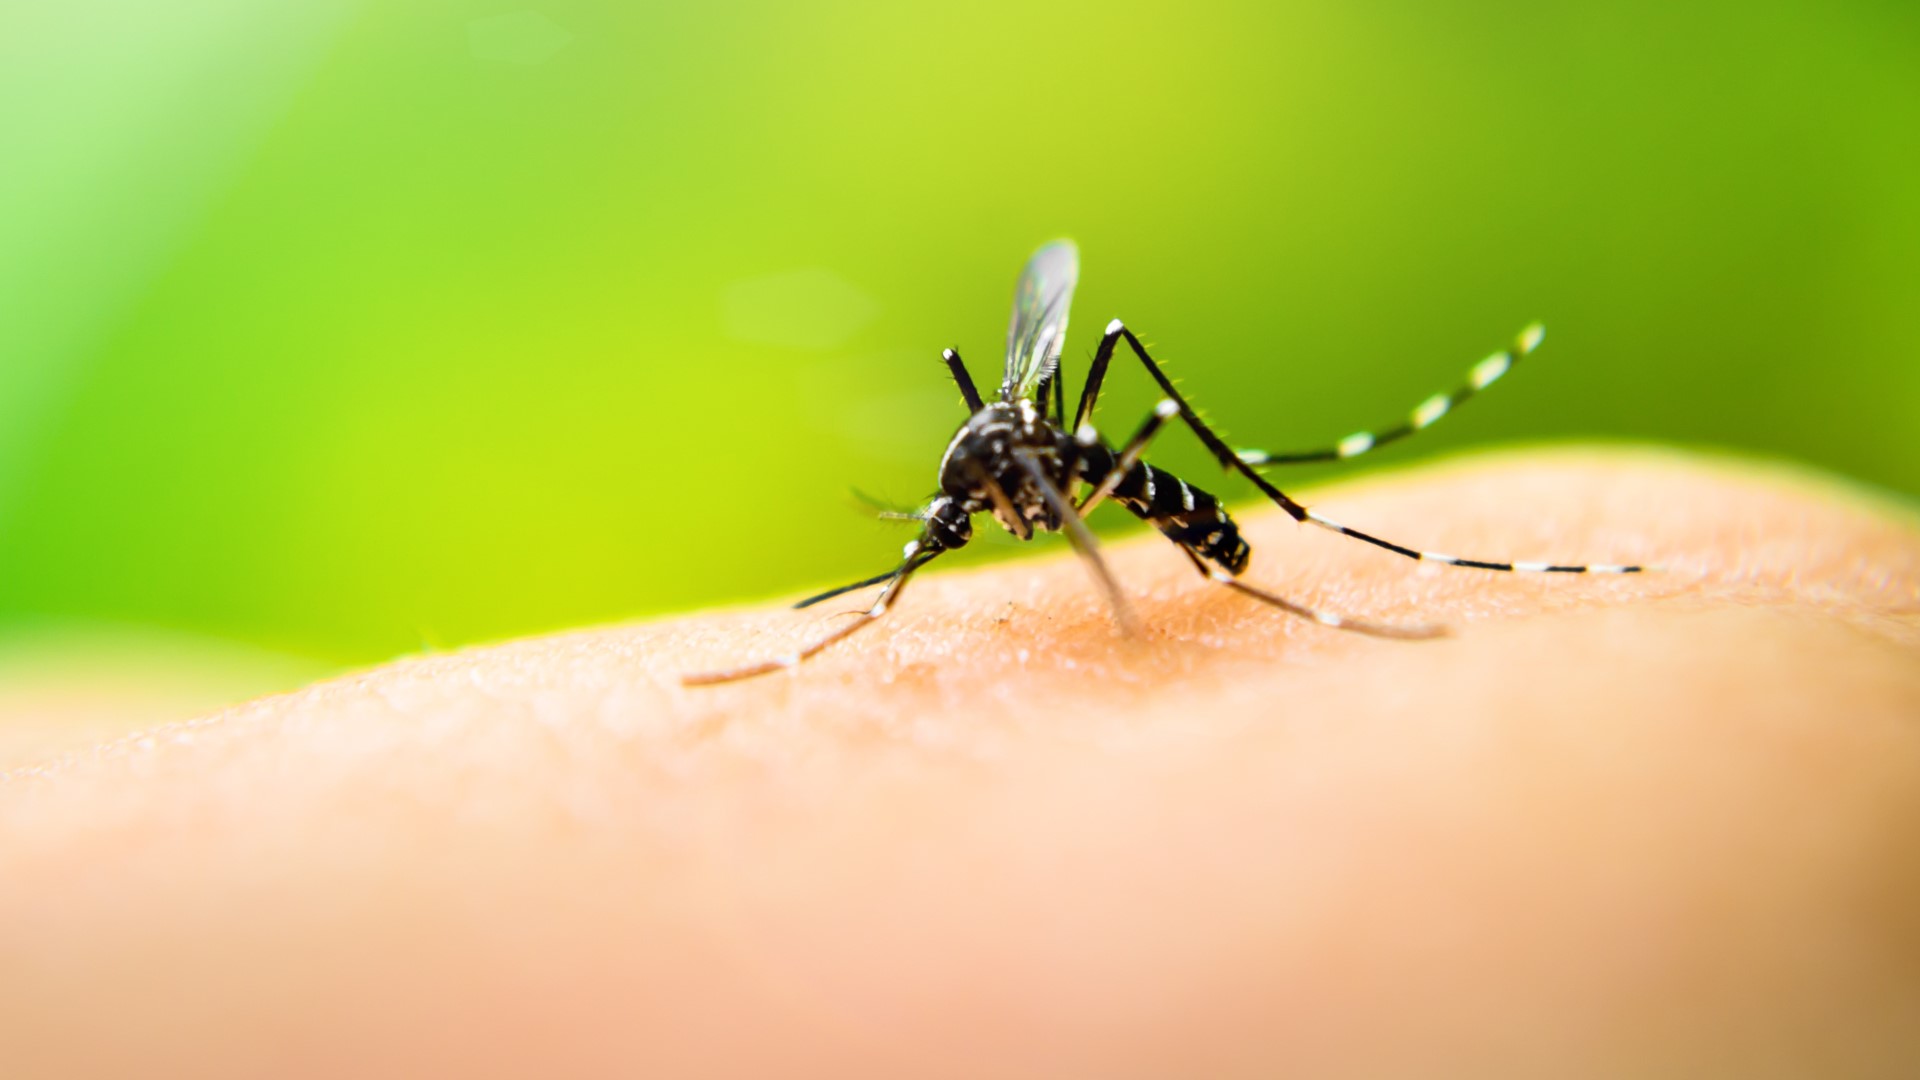 Summer is setting in, so many will be in search of the best repellants to keep unwanted visitors away. Here's what you need to know to keep the mosquitoes at bay.